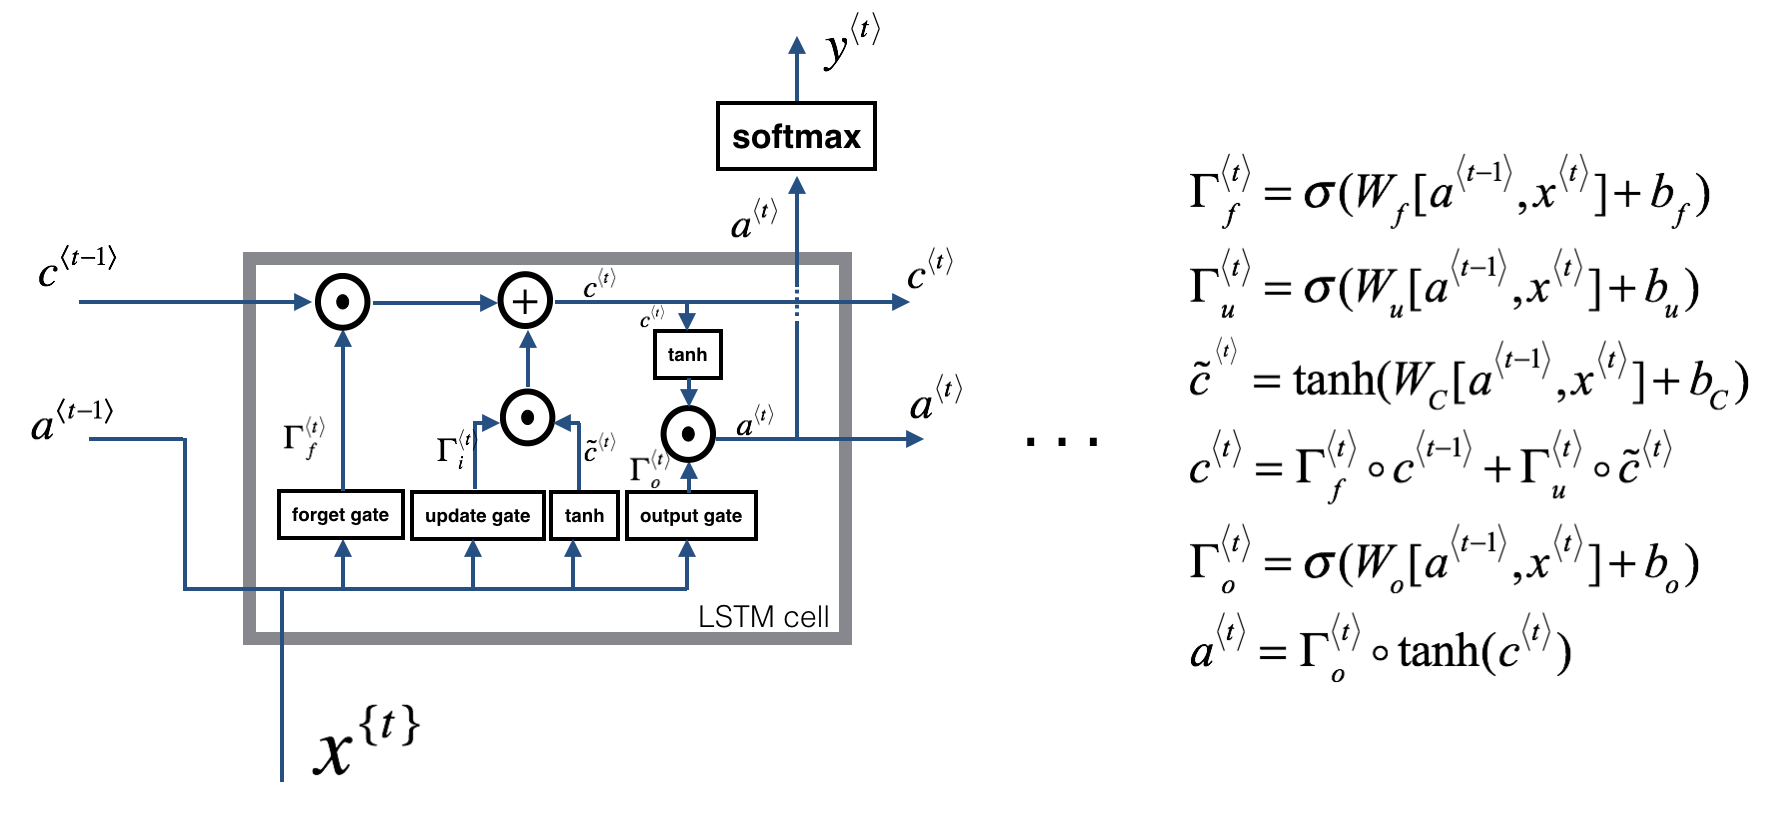 Calculations in an LSTM cell